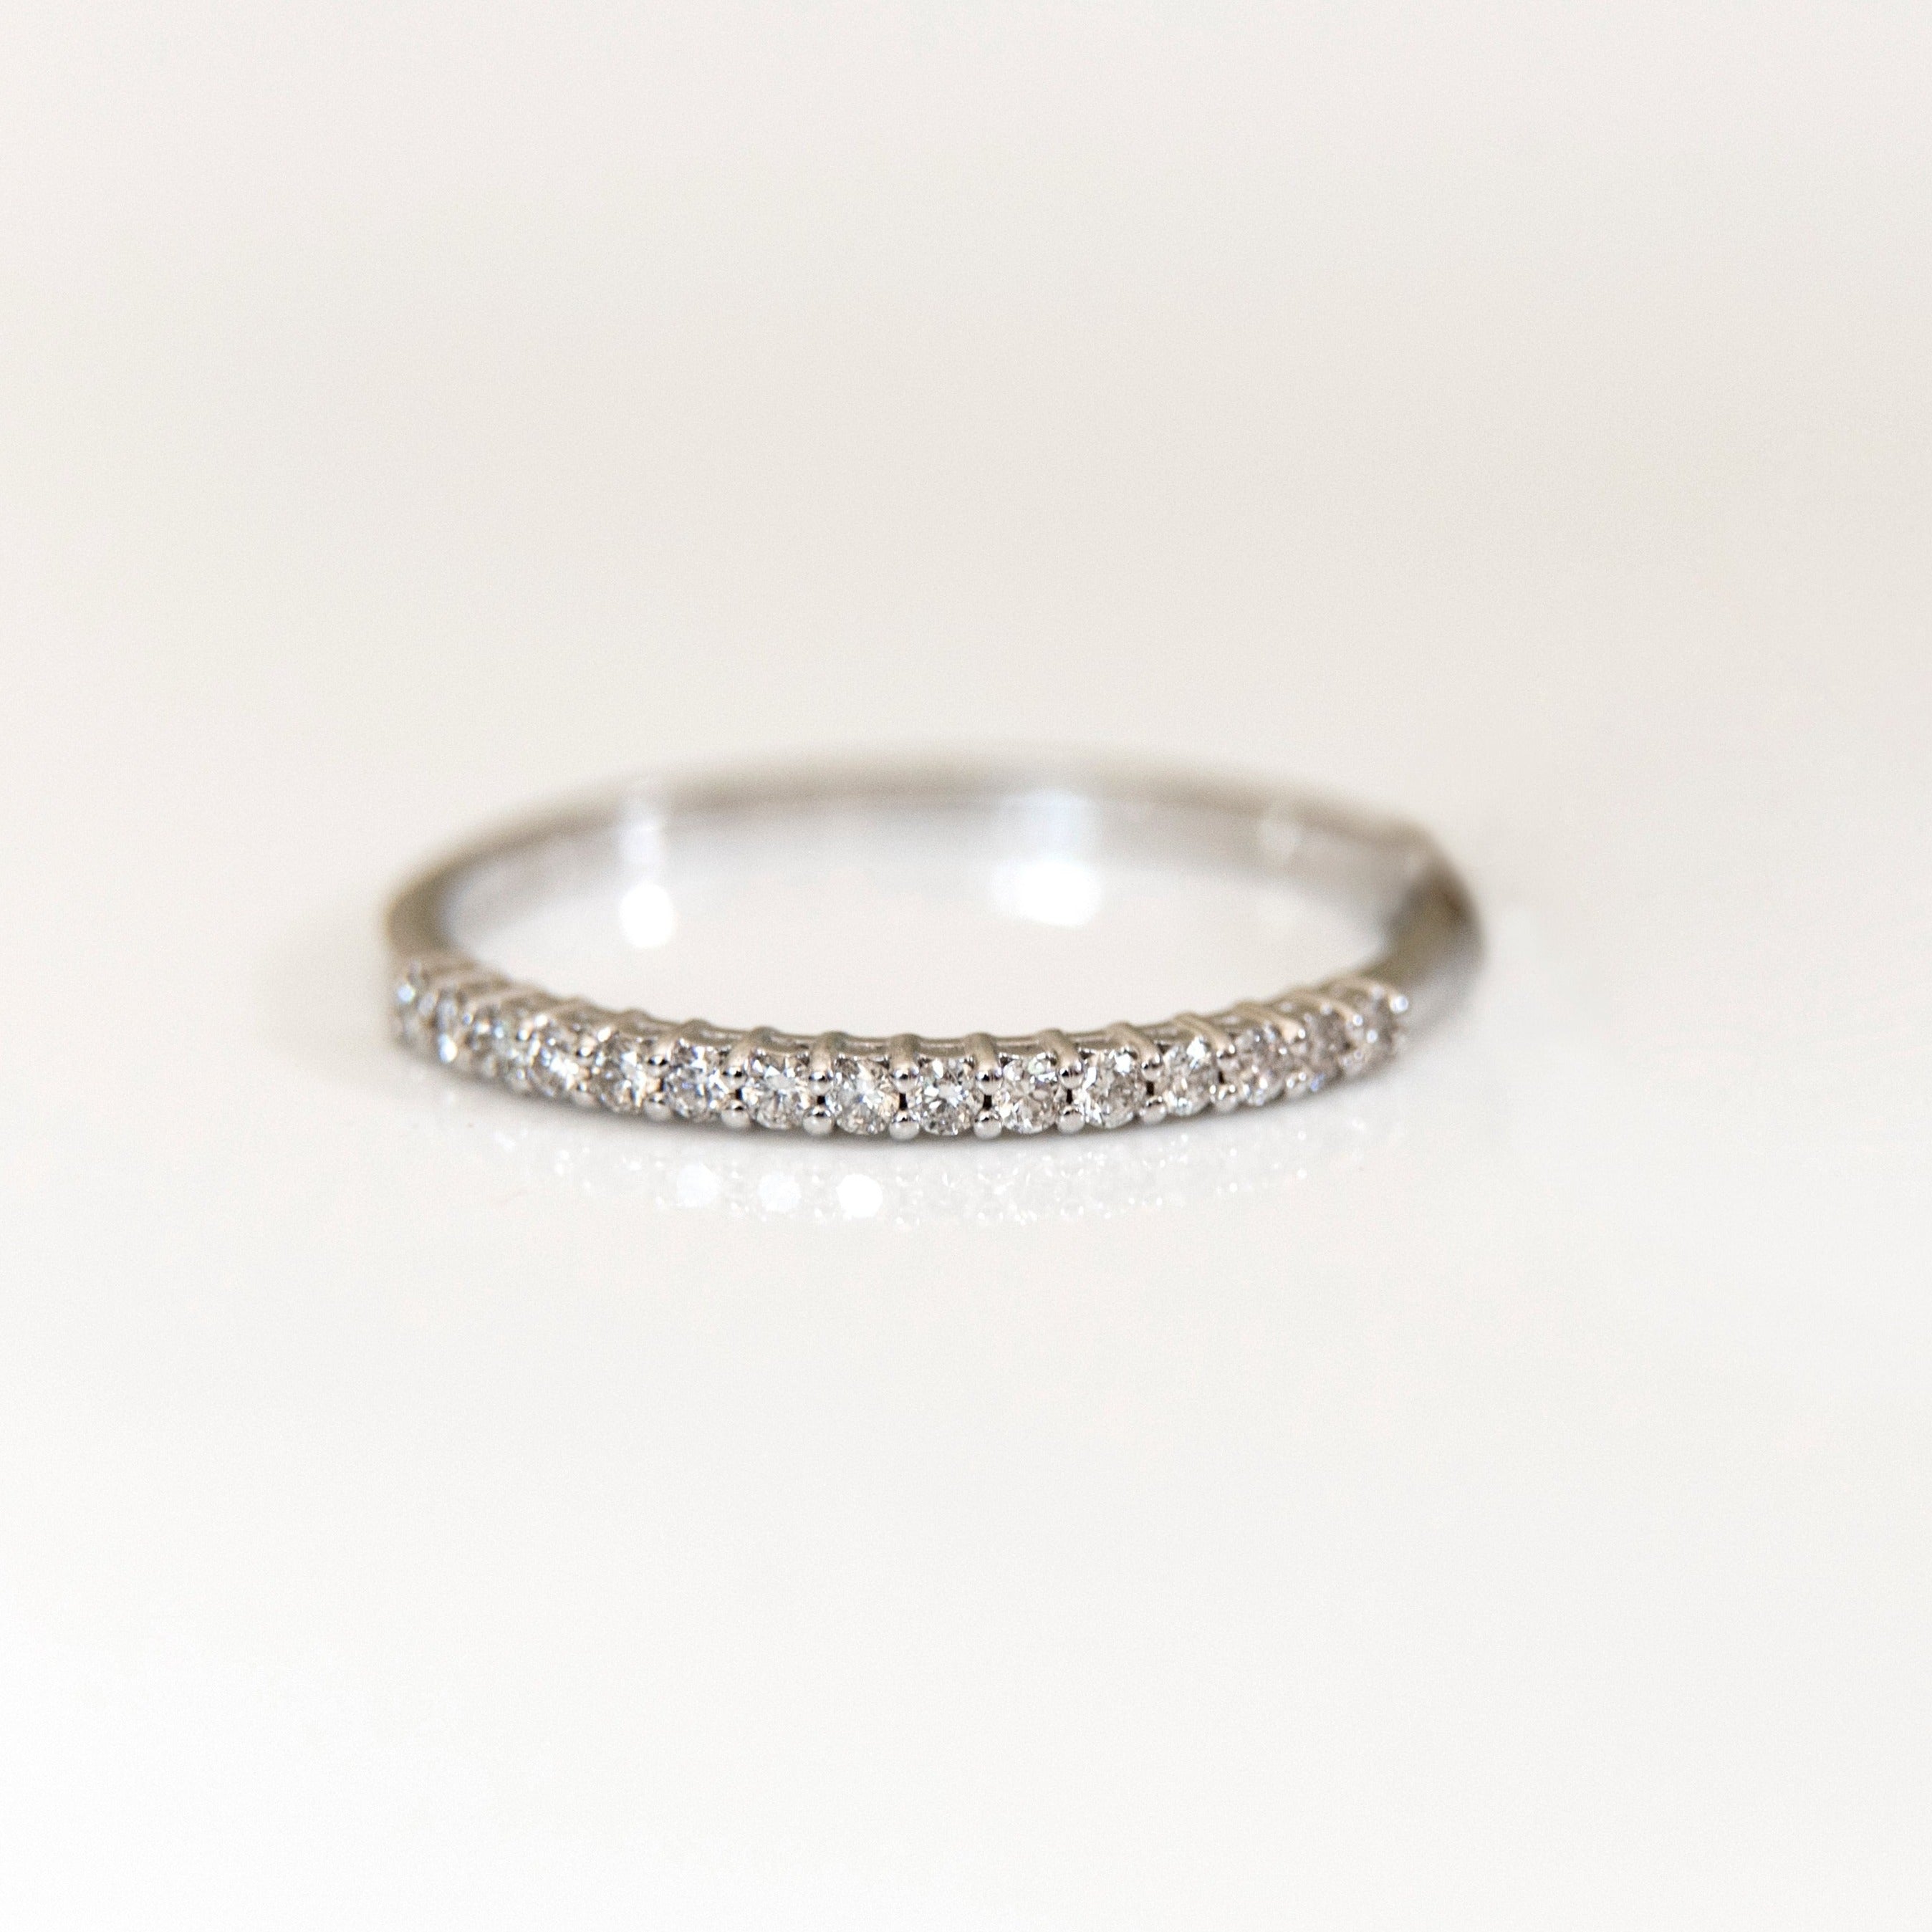  0.15ct diamond eternity band, made up of 15 diamonds of 1.3mm each